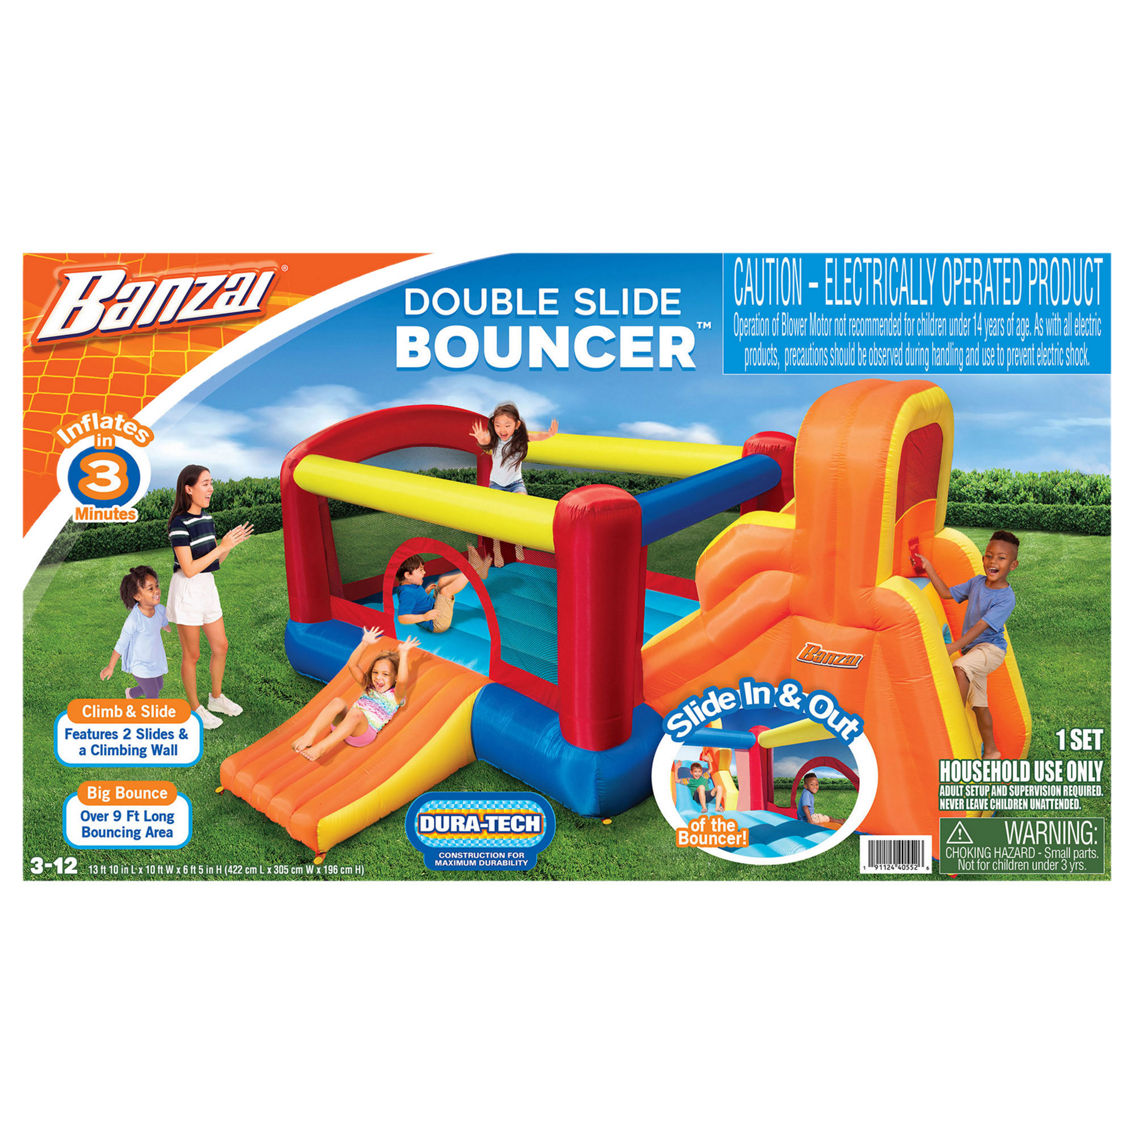 Double Slide Bouncer - Image 2 of 8